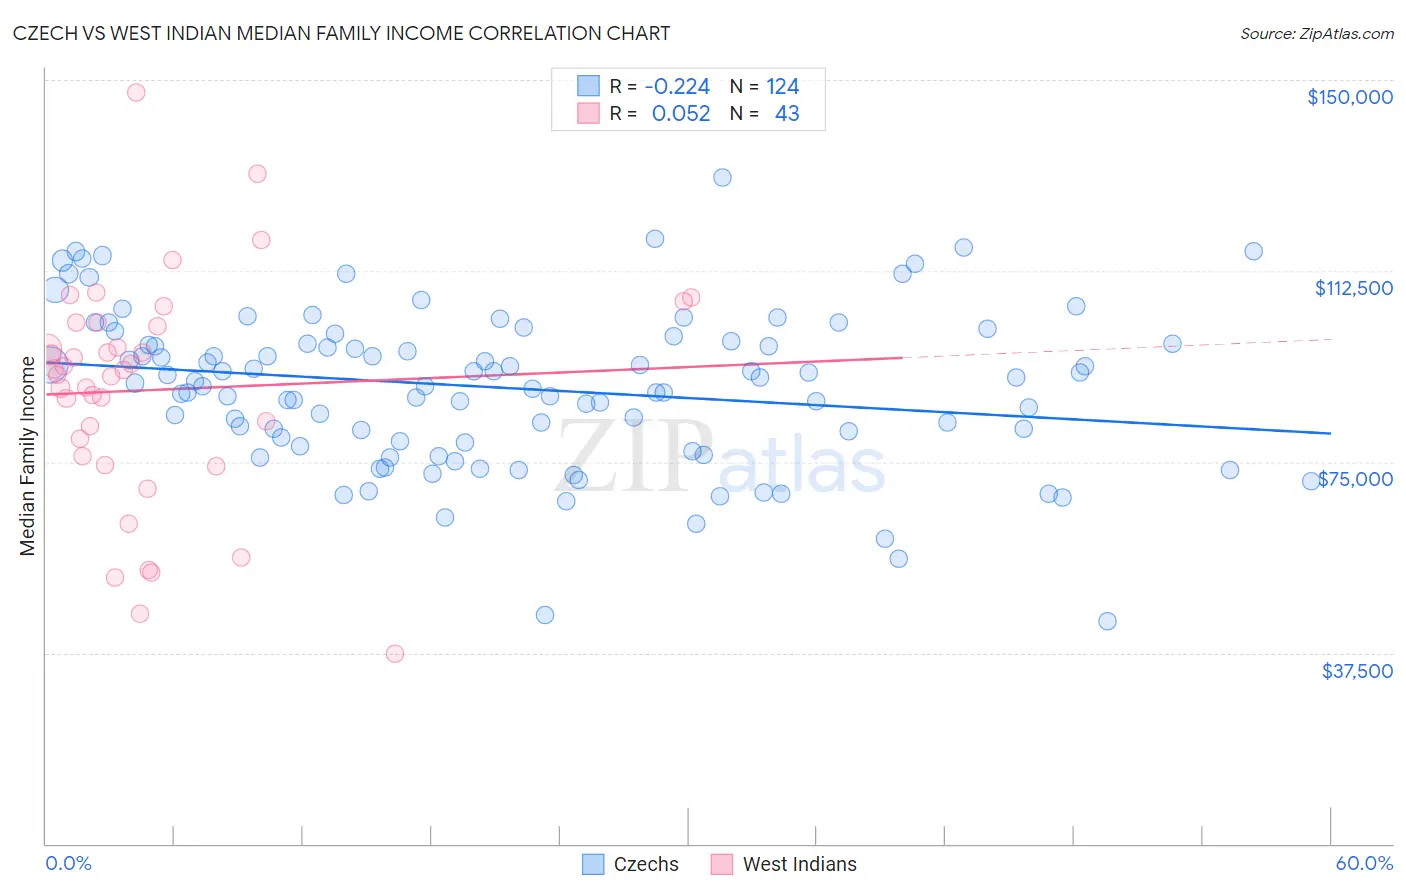 Czech vs West Indian Median Family Income